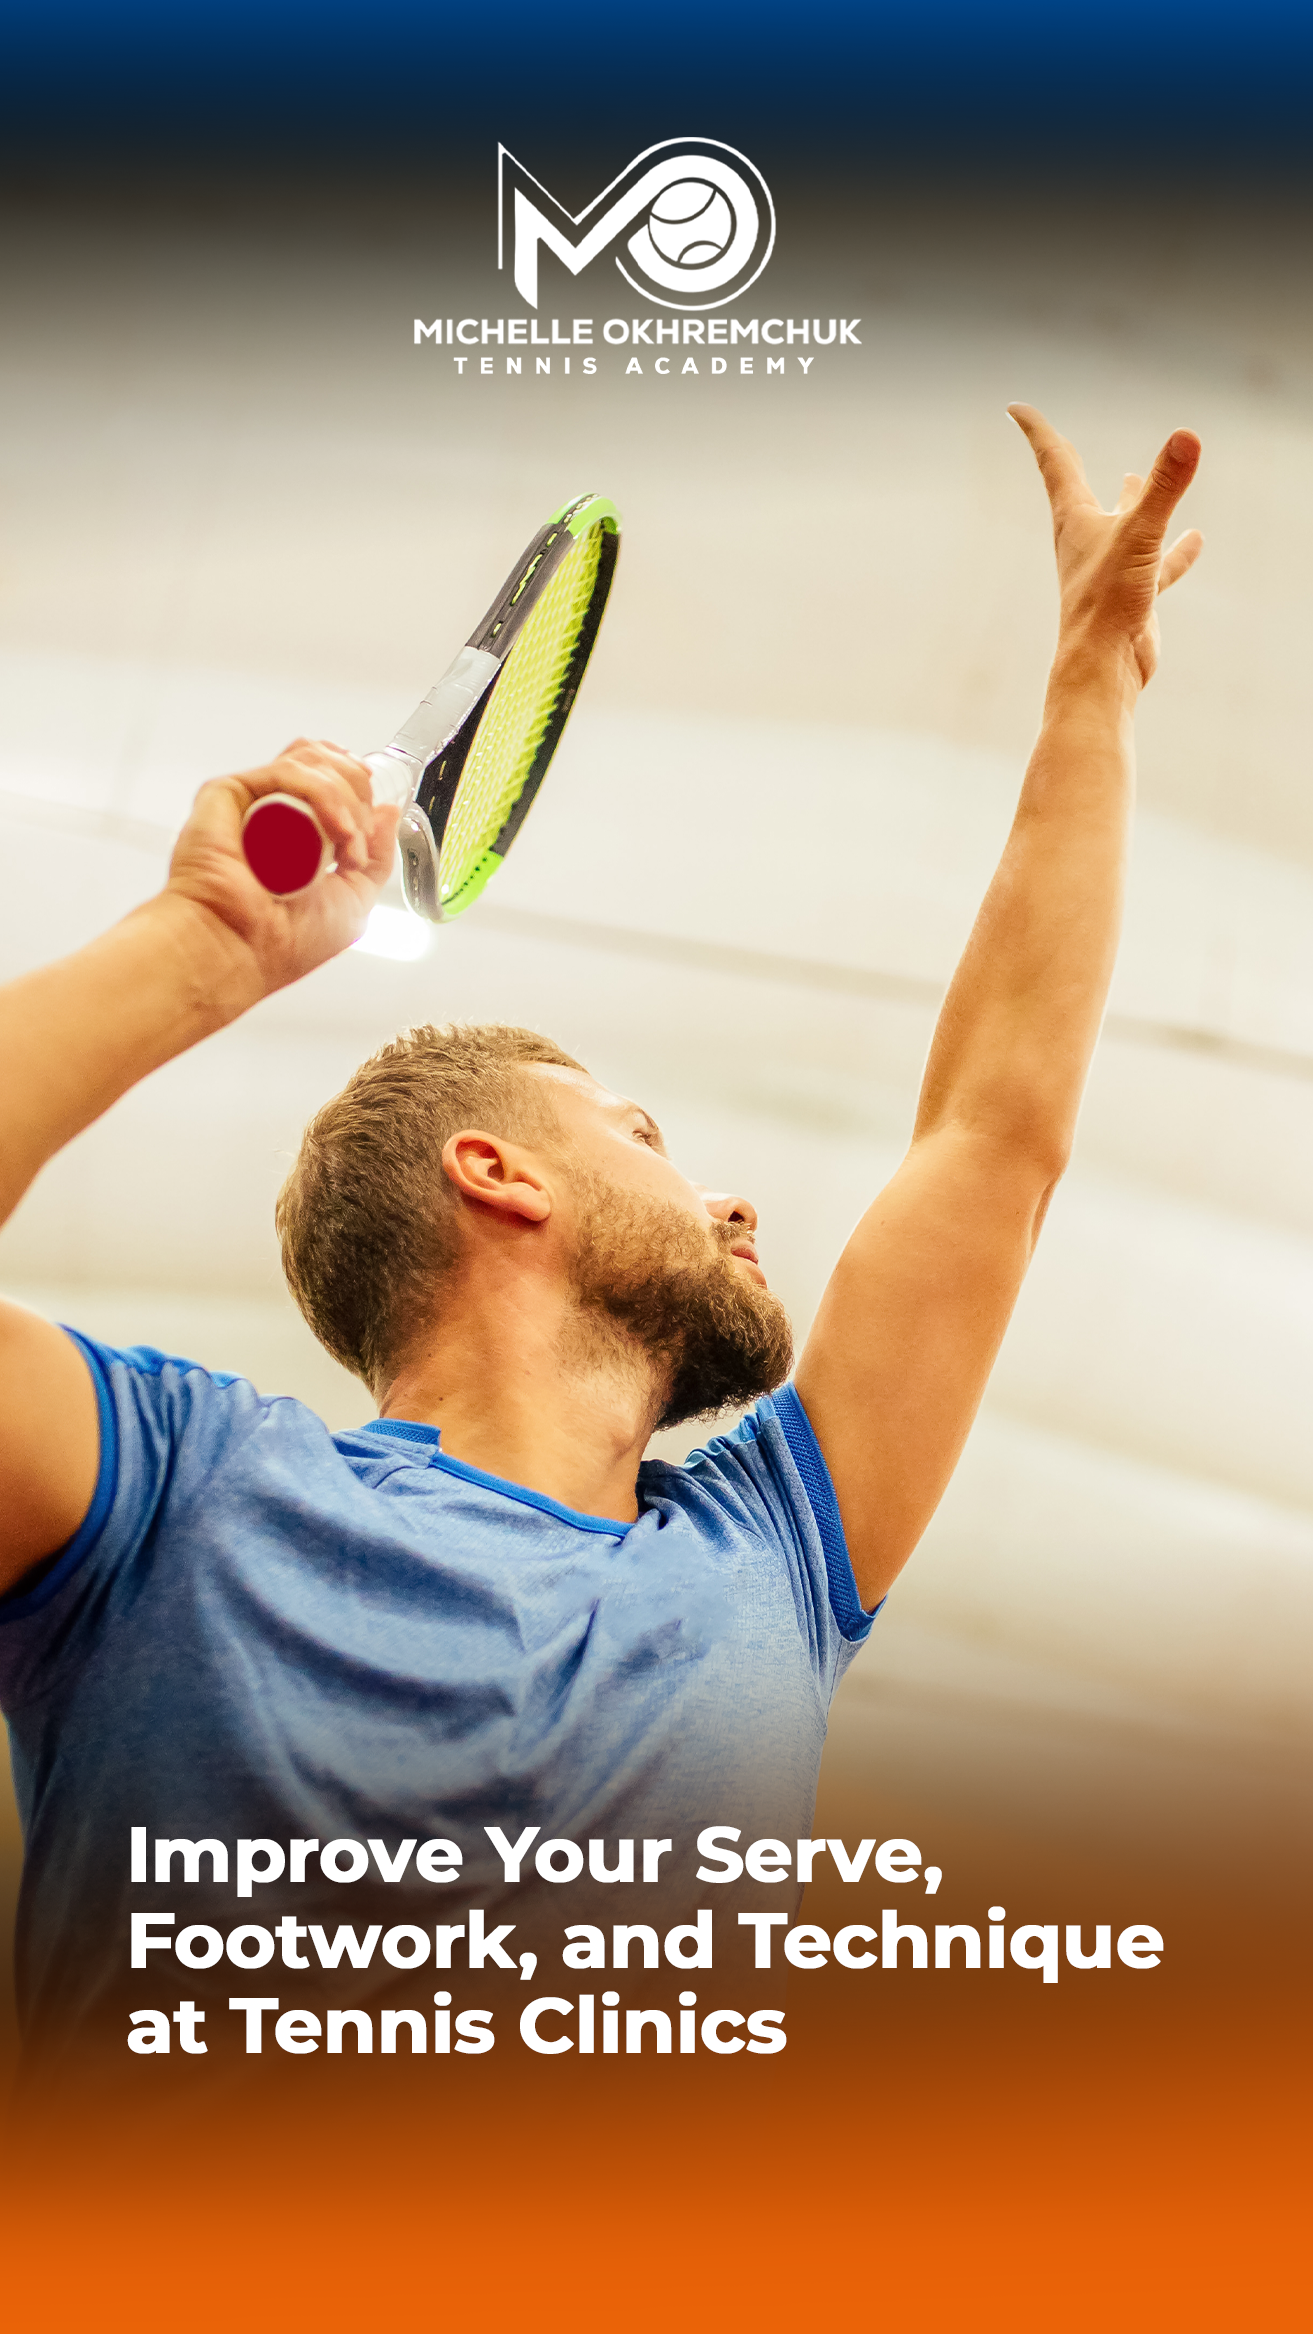 Improve Your Serve, Footwork, and Technique at Tennis Clinics - Mo Tennis Training Academy